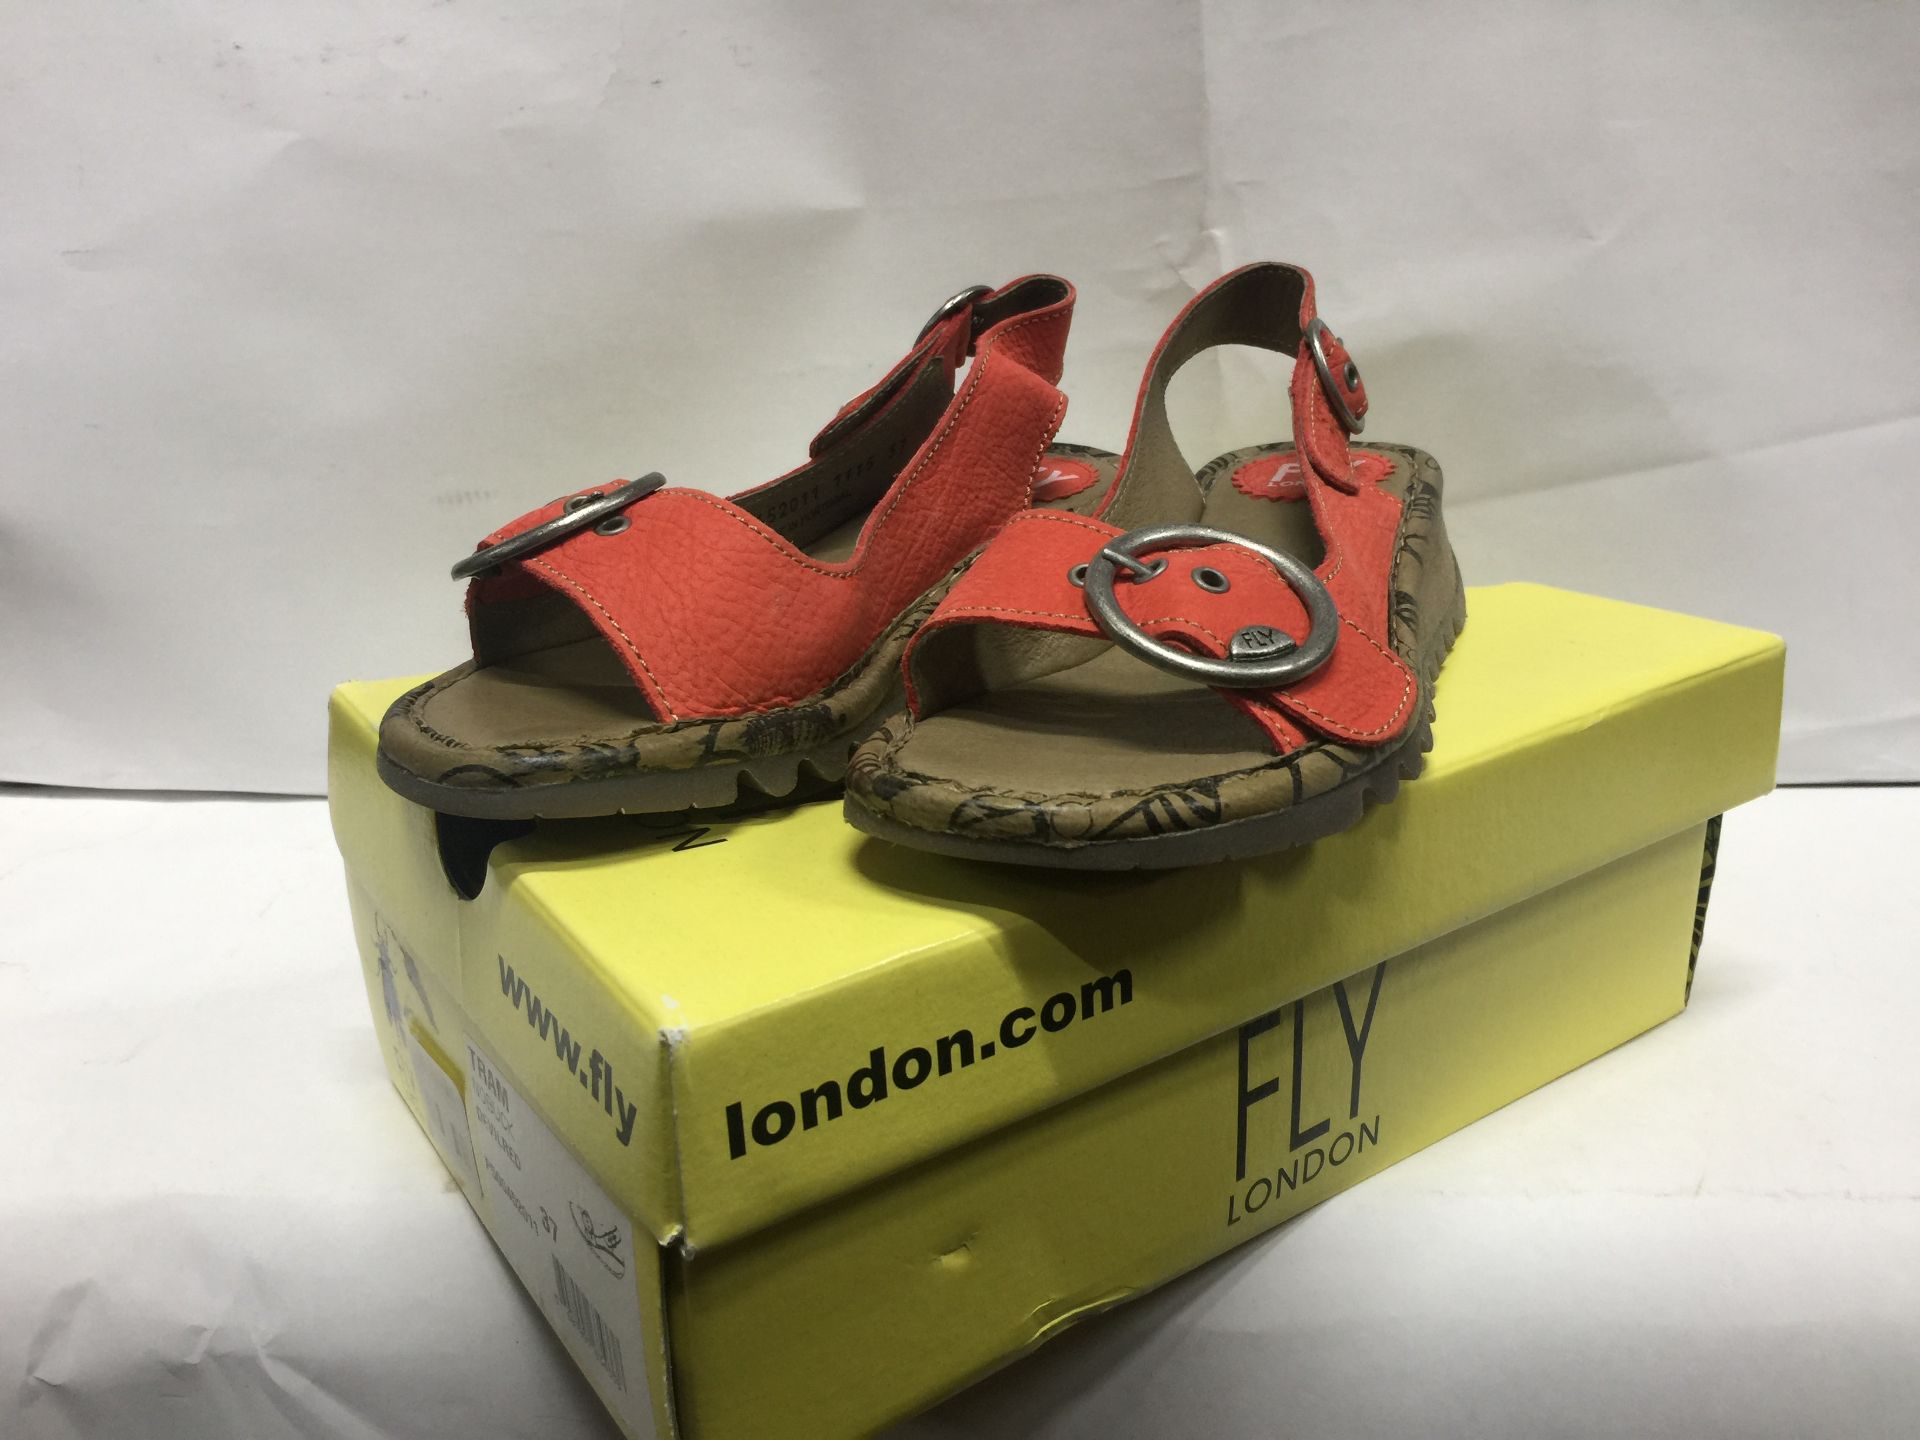 21 x Fly London Women's Sandles Mixed Sizes, Styles and Colours Size Ranging EU 36 - EU 41 - Custome - Image 4 of 6